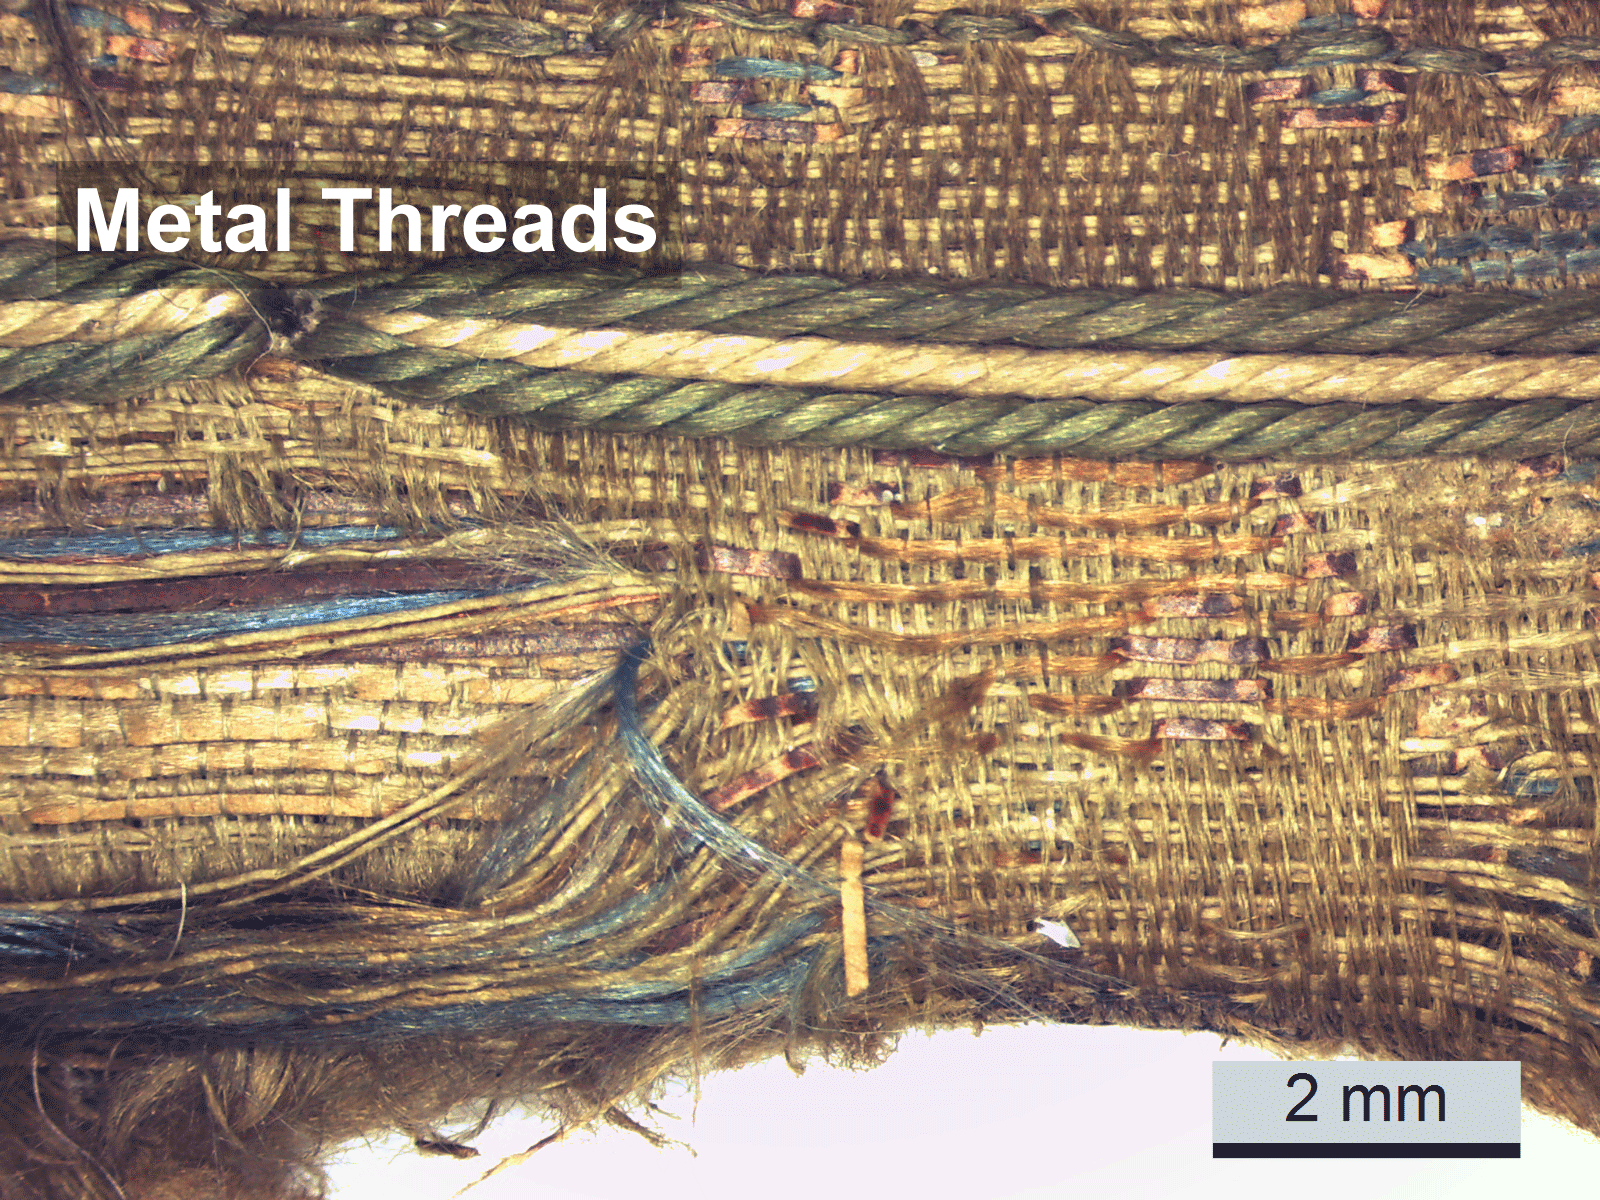 Magnified view of a complex weave pattern including paper wefts, which are highlighted in blinking red for emphasis